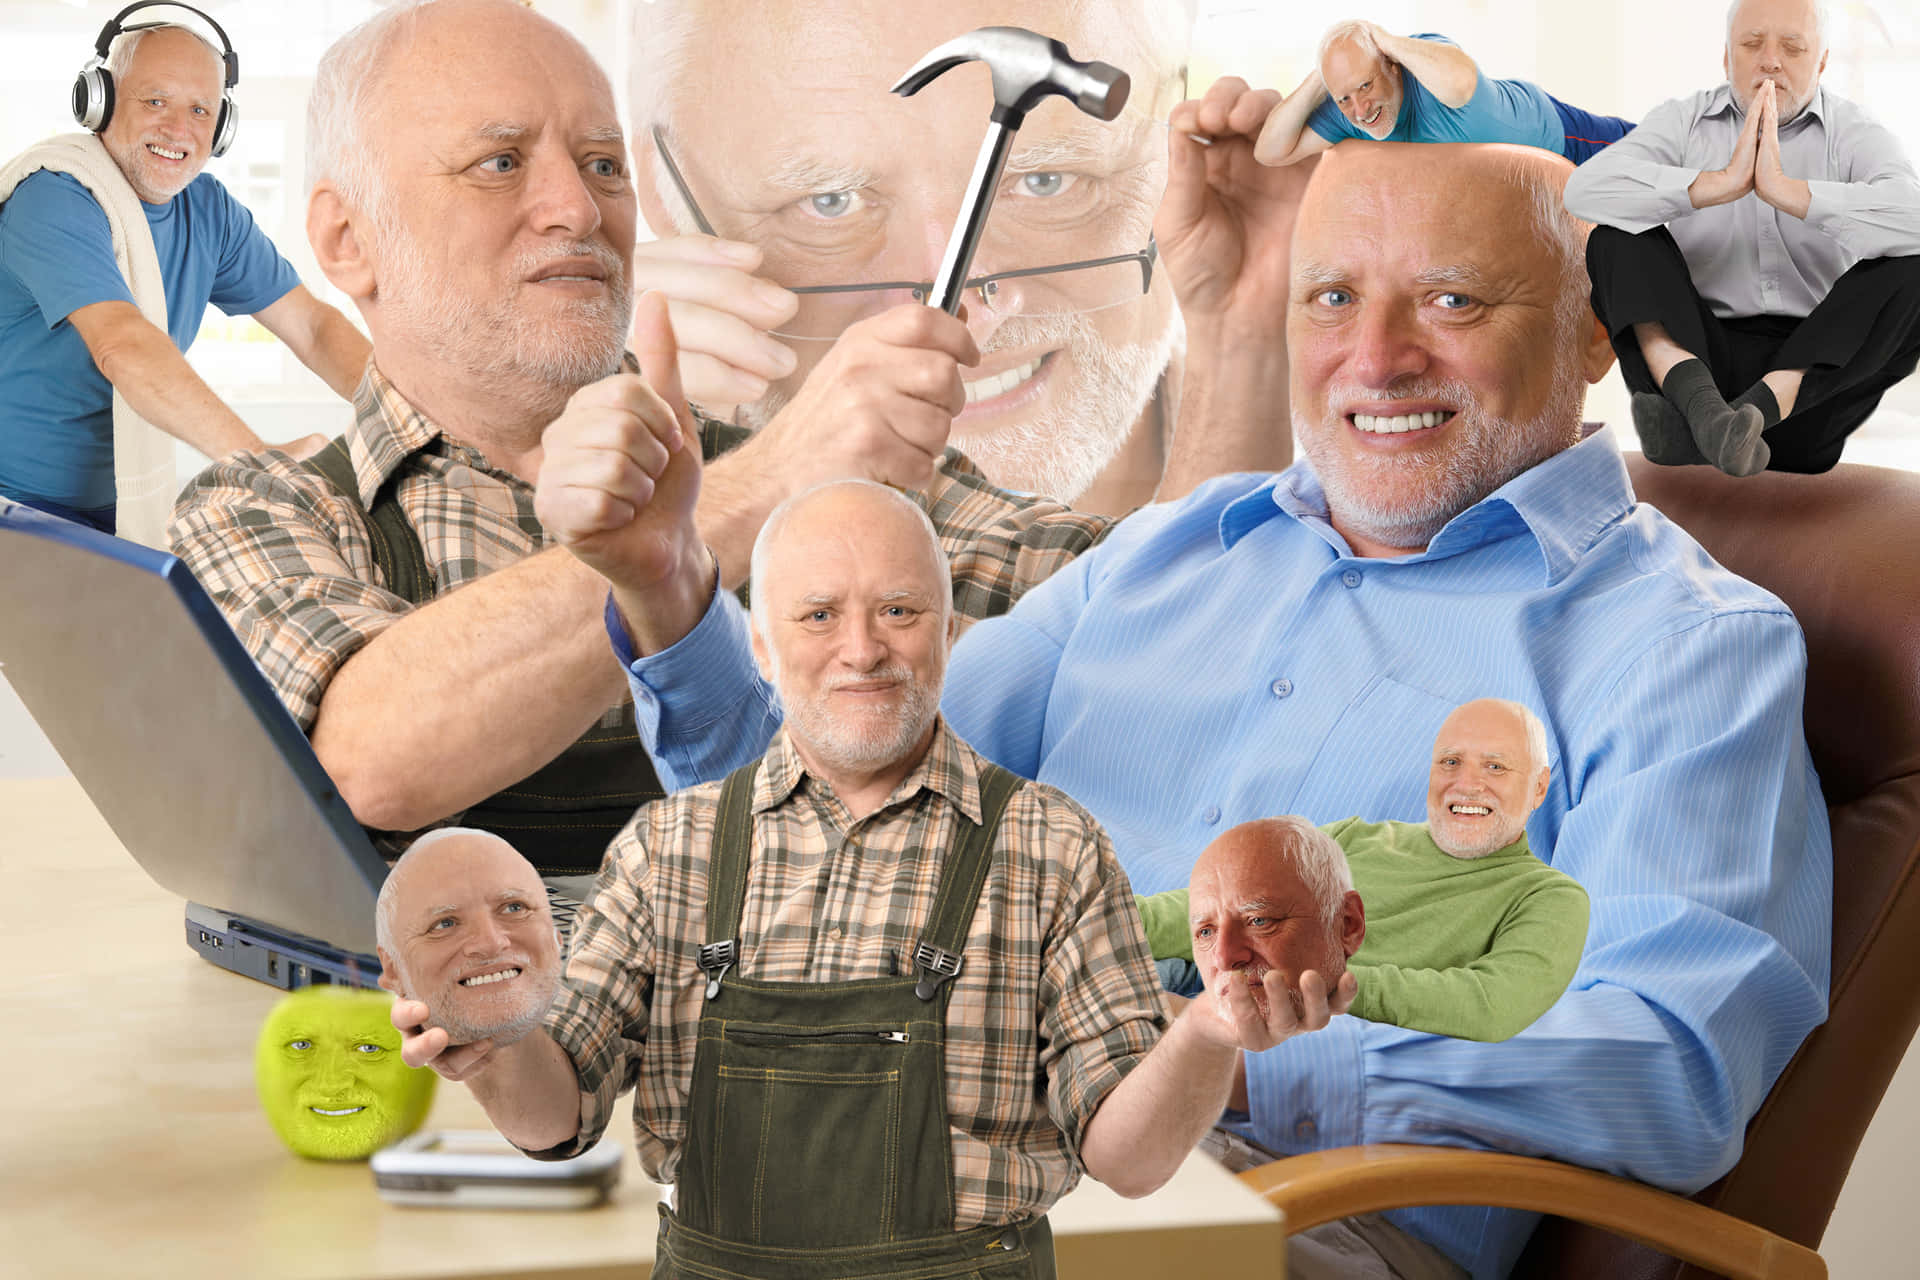 A Collage Of Old Men With A Hammer And A Laptop